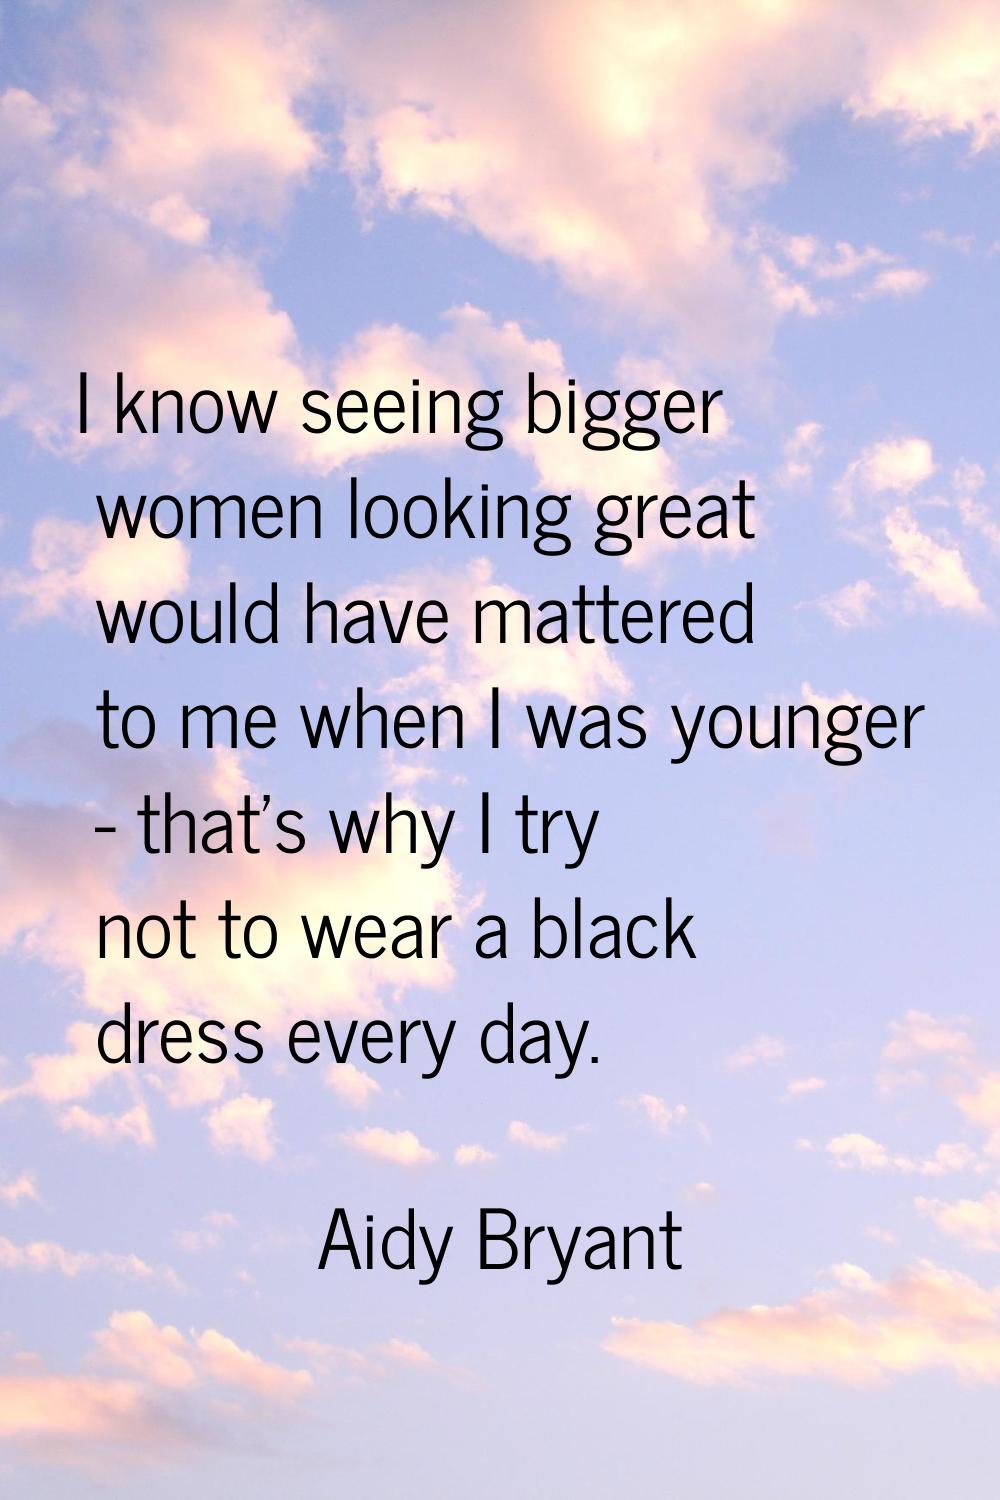 I know seeing bigger women looking great would have mattered to me when I was younger - that's why 